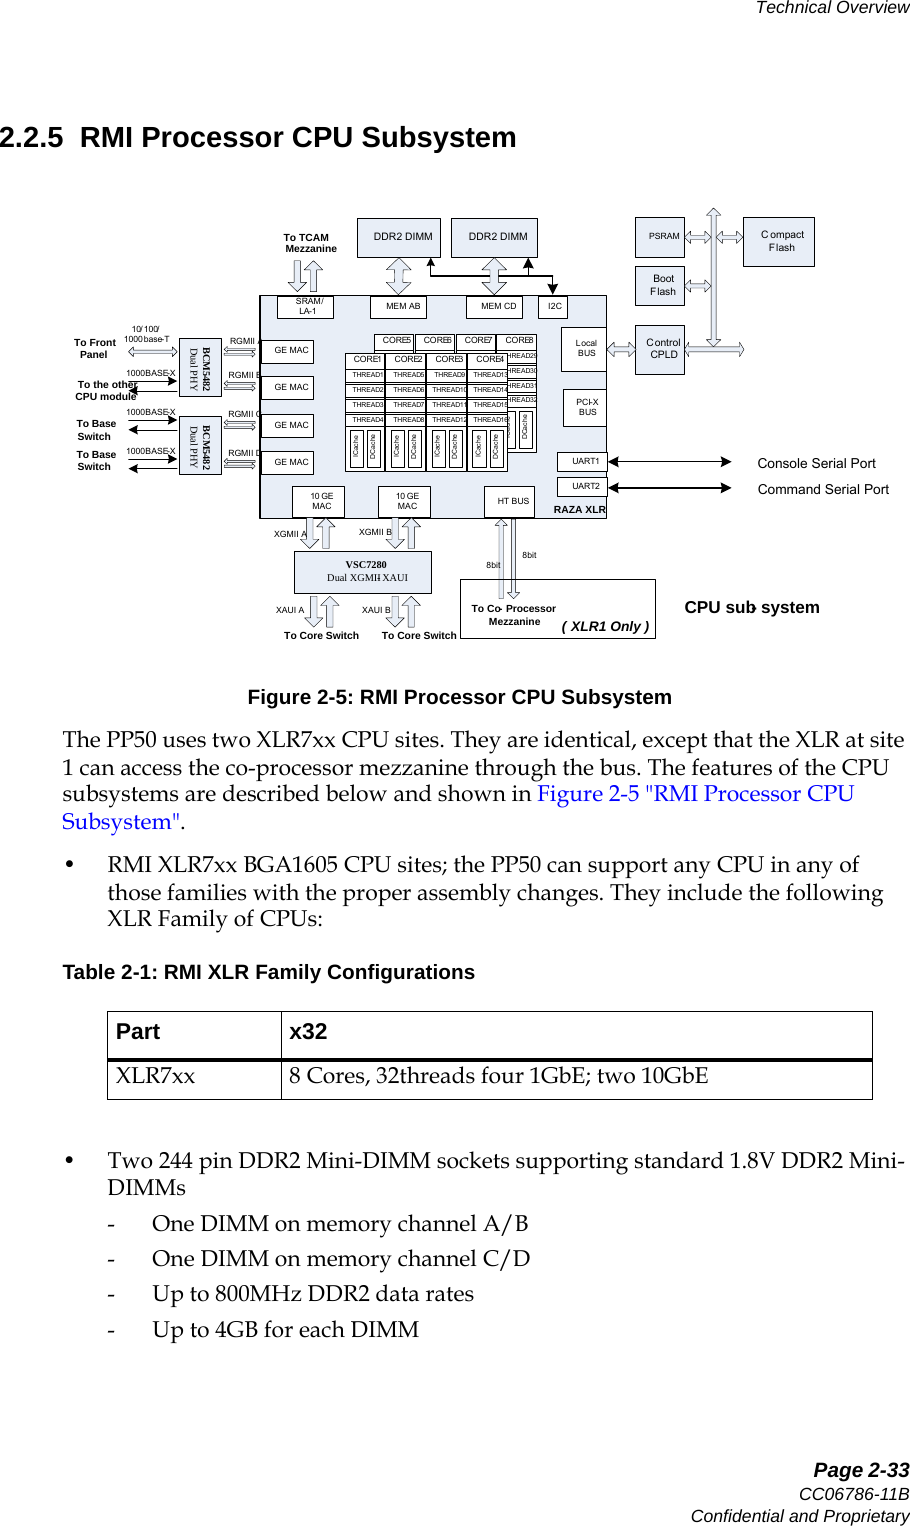   Page 2-33CC06786-11BConfidential and ProprietaryTechnical Overview14ABABPreliminary2.2.5  RMI Processor CPU SubsystemFigure 2-5: RMI Processor CPU SubsystemThe PP50 uses two XLR7xx CPU sites. They are identical, except that the XLR at site 1 can access the co-processor mezzanine through the bus. The features of the CPU subsystems are described below and shown in Figure 2-5 &quot;RMI Processor CPU Subsystem&quot;.• RMI XLR7xx BGA1605 CPU sites; the PP50 can support any CPU in any of those families with the proper assembly changes. They include the following XLR Family of CPUs:• Two 244 pin DDR2 Mini-DIMM sockets supporting standard 1.8V DDR2 Mini-DIMMs- One DIMM on memory channel A/B- One DIMM on memory channel C/D- Up to 800MHz DDR2 data rates-Up to 4GB for each DIMMTable 2-1: RMI XLR Family ConfigurationsPart x32XLR7xx 8 Cores, 32threads four 1GbE; two 10GbEC ompact FlashCORE5THREAD 17THREAD 18THREAD 19THREAD 20ICacheDCacheCORE6THREAD 21THREAD 22THREAD 23THREAD 24ICacheDCacheCORE7THREAD 25THREAD 26THREAD 27THREAD 28ICacheDCacheCORE8THREAD 29THREAD 30THREAD 31THREAD 32ICacheDCacheTo TCAM  Mezzanine DDR2 DIMMDDR2 DIMMRGMII ARGMII BRGMII CRGMII DGE MACGE MACGE MACGE MACSRAM / LA-1 MEM AB MEM CD10 GE MAC10 GE MACXGMII A XGMII BLocalBUSPCI-XBUSUART 1UART 2HT BUSBootFlashConsole Serial PortCommand Serial PortCPU sub- systemTo Co- ProcessorMezzanineVSC7280Dual XGMII- XAUIXAUI A XAUI BI2CCORE1THREAD 1THREAD 2THREAD 3THREAD 4ICacheDCacheCORE2THREAD 5THREAD 6THREAD 7THREAD 8ICacheDCacheCORE3THREAD 9THREAD 10THREAD 11THREAD 12ICacheDCacheCORE4THREAD 13THREAD 14THREAD 15THREAD 16ICacheDCacheRAZA XLR 8bit8bitPSRAM10/ 100/1000 base-T1000BASE-X1000BASE-X1000BASE-XTo FrontPanelTo the other CPU moduleTo Base SwitchTo Core Switch To Core SwitchTo Base SwitchC ontrol CPLD(XLR1 Only)BCM5482Dual  PHYBCM5482Dual  PHY